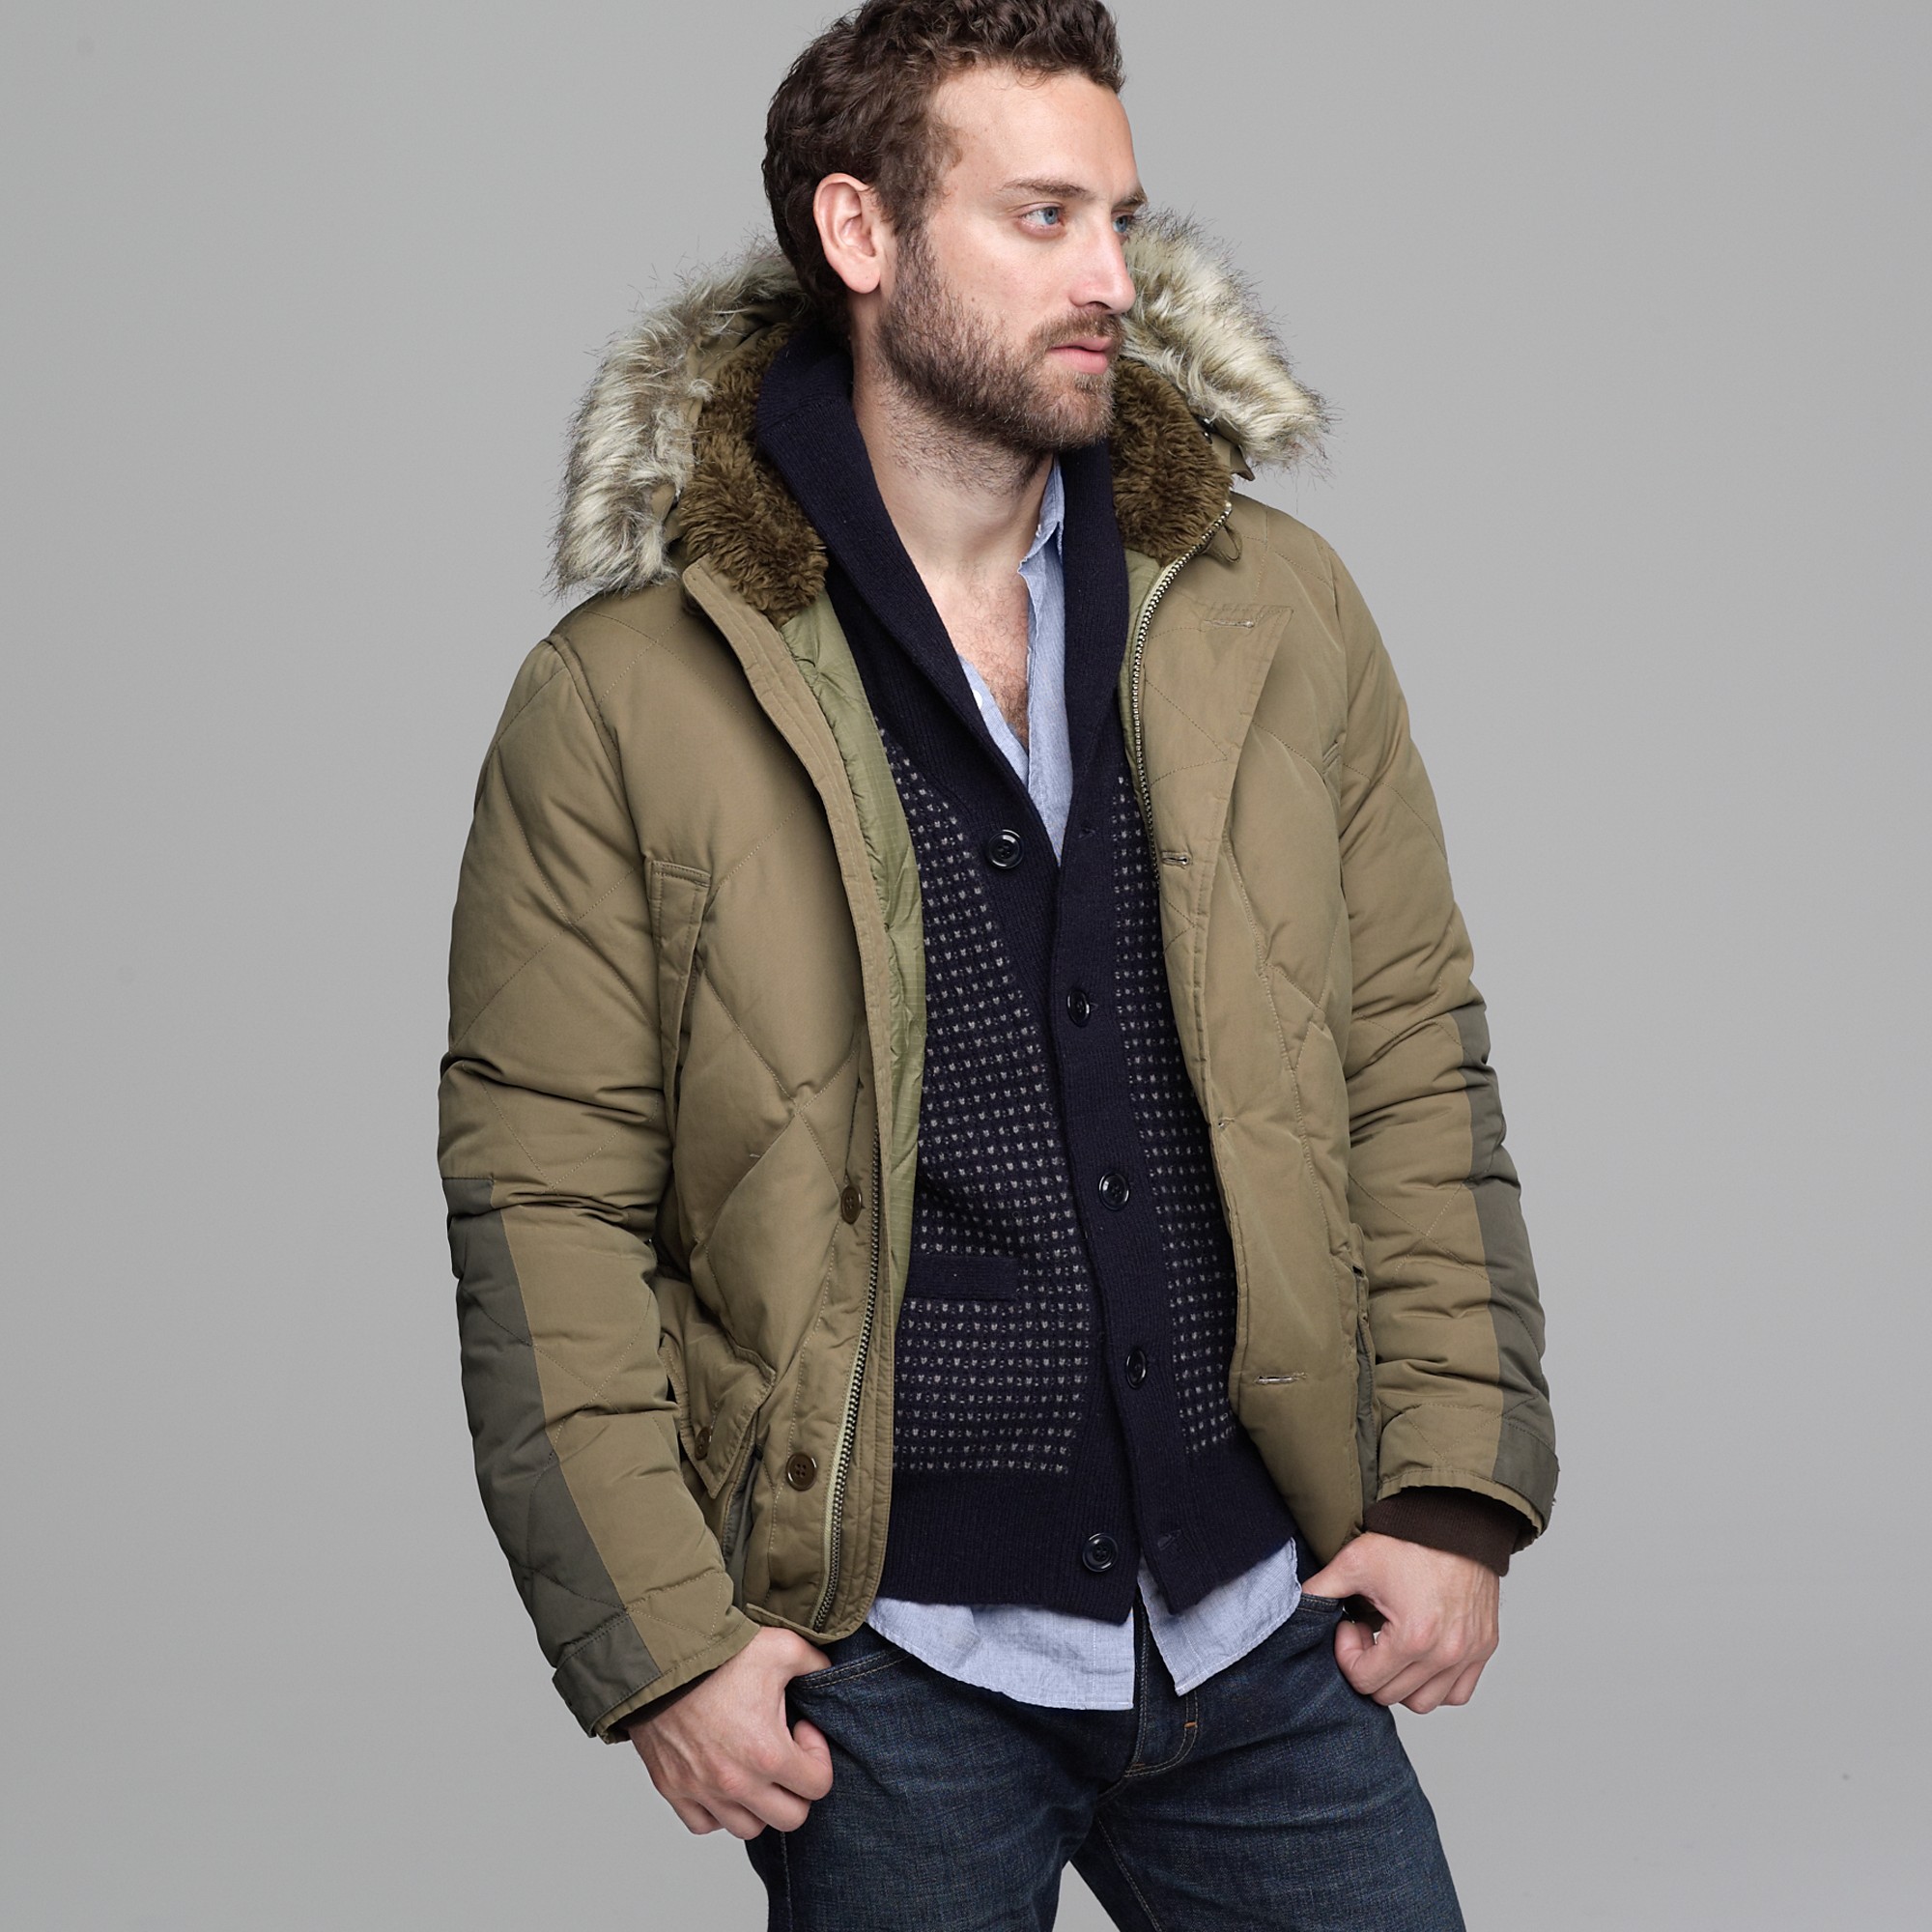 Lyst - J.Crew Wallace & Barnes Sawtooth Jacket in Green for Men